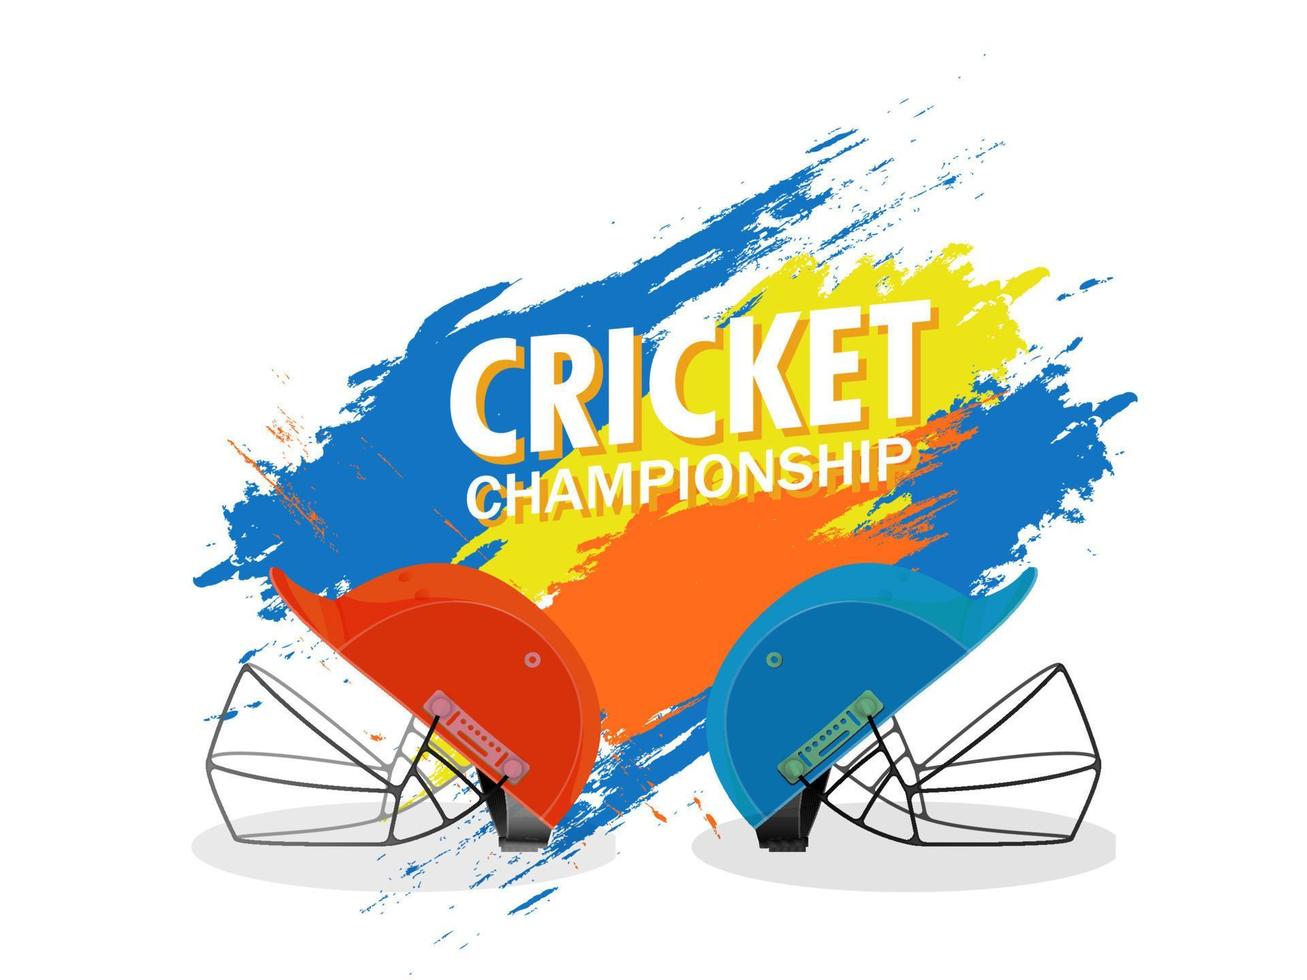 Cricket Championship Poster Design with Two Helmets of Participants Team and Colorful Brush Stroke Effect on White Background. vector